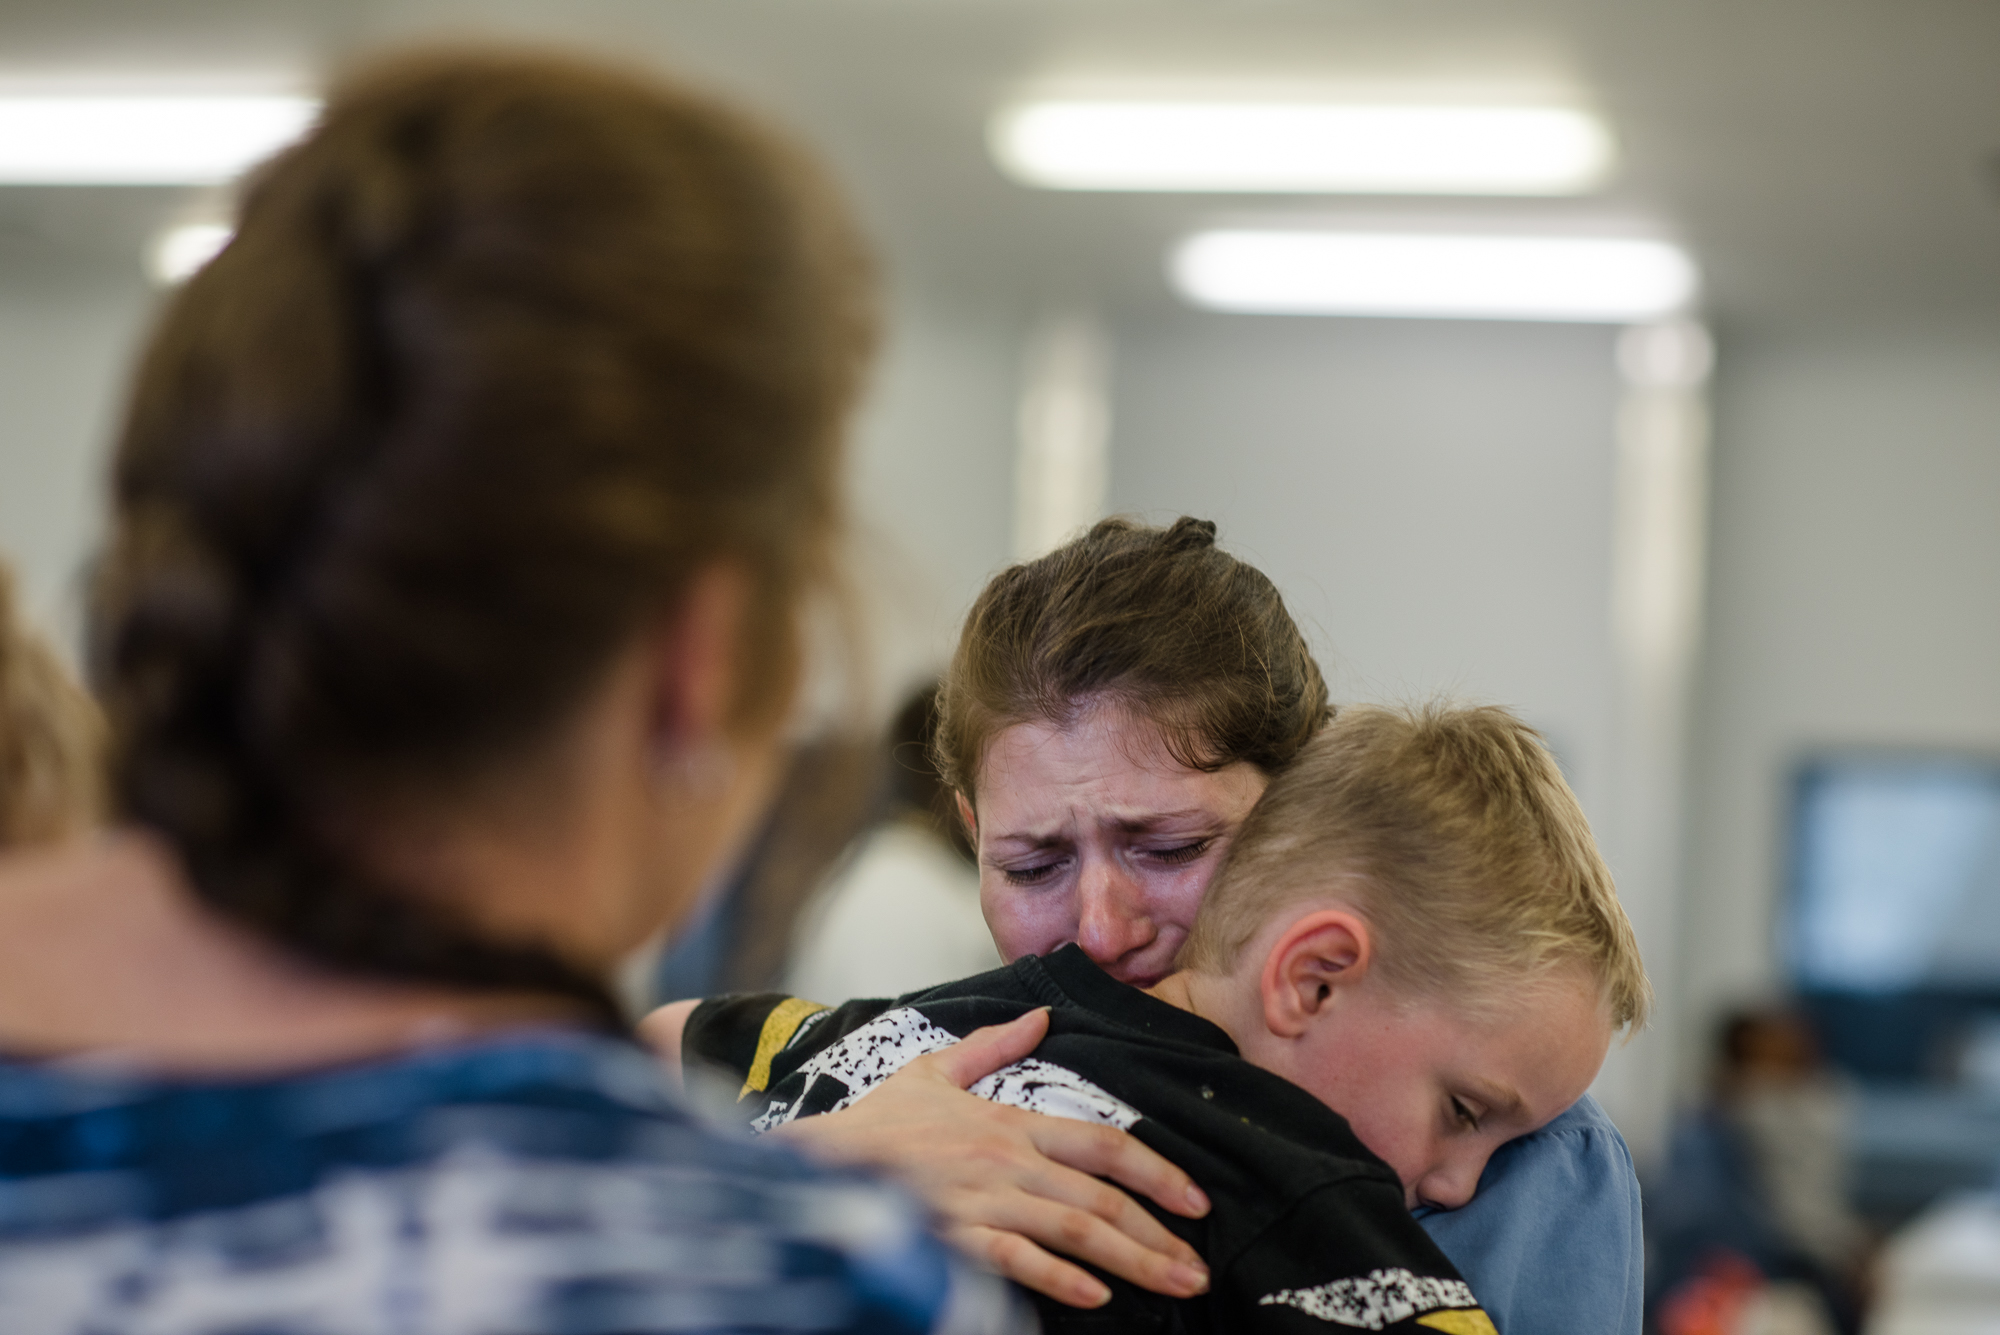  Jessie hugs her son goodbye as her mother stands with her during the end of a visit at the Lowell Correctional Institution in Ocala, Florida. 